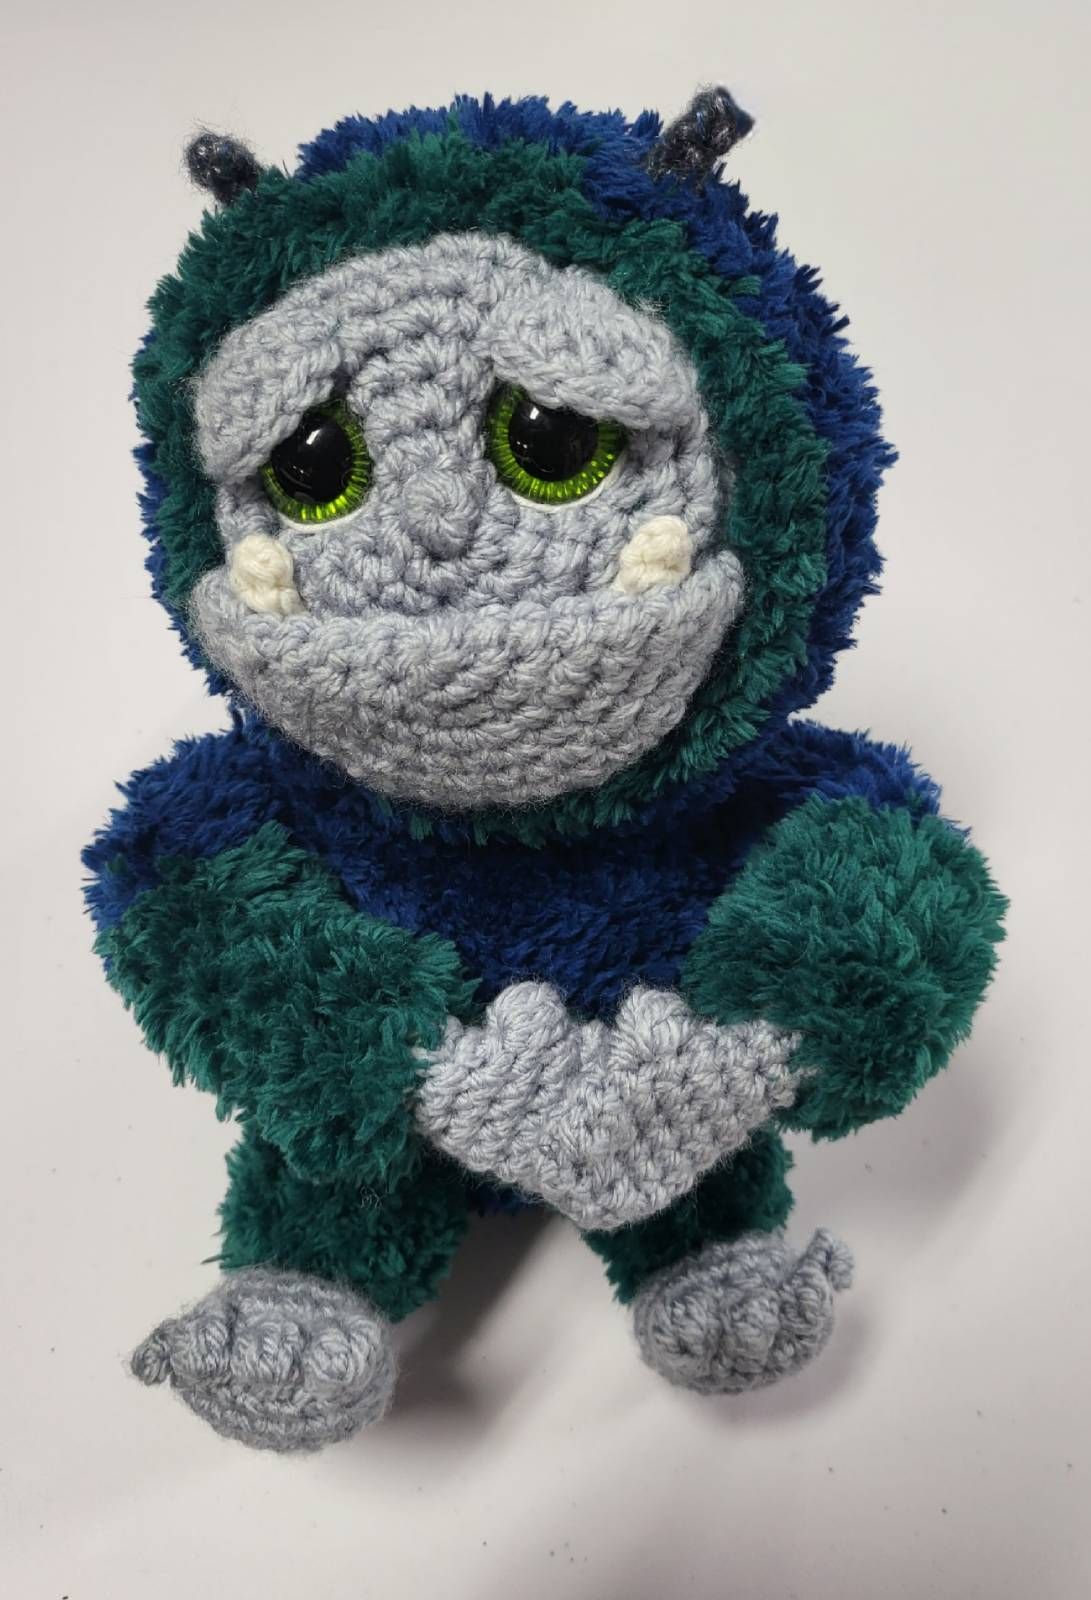 Gremlin Crochet Pattern Amigurumi Review by Kathryn Jeter for Cottontail Whiskers